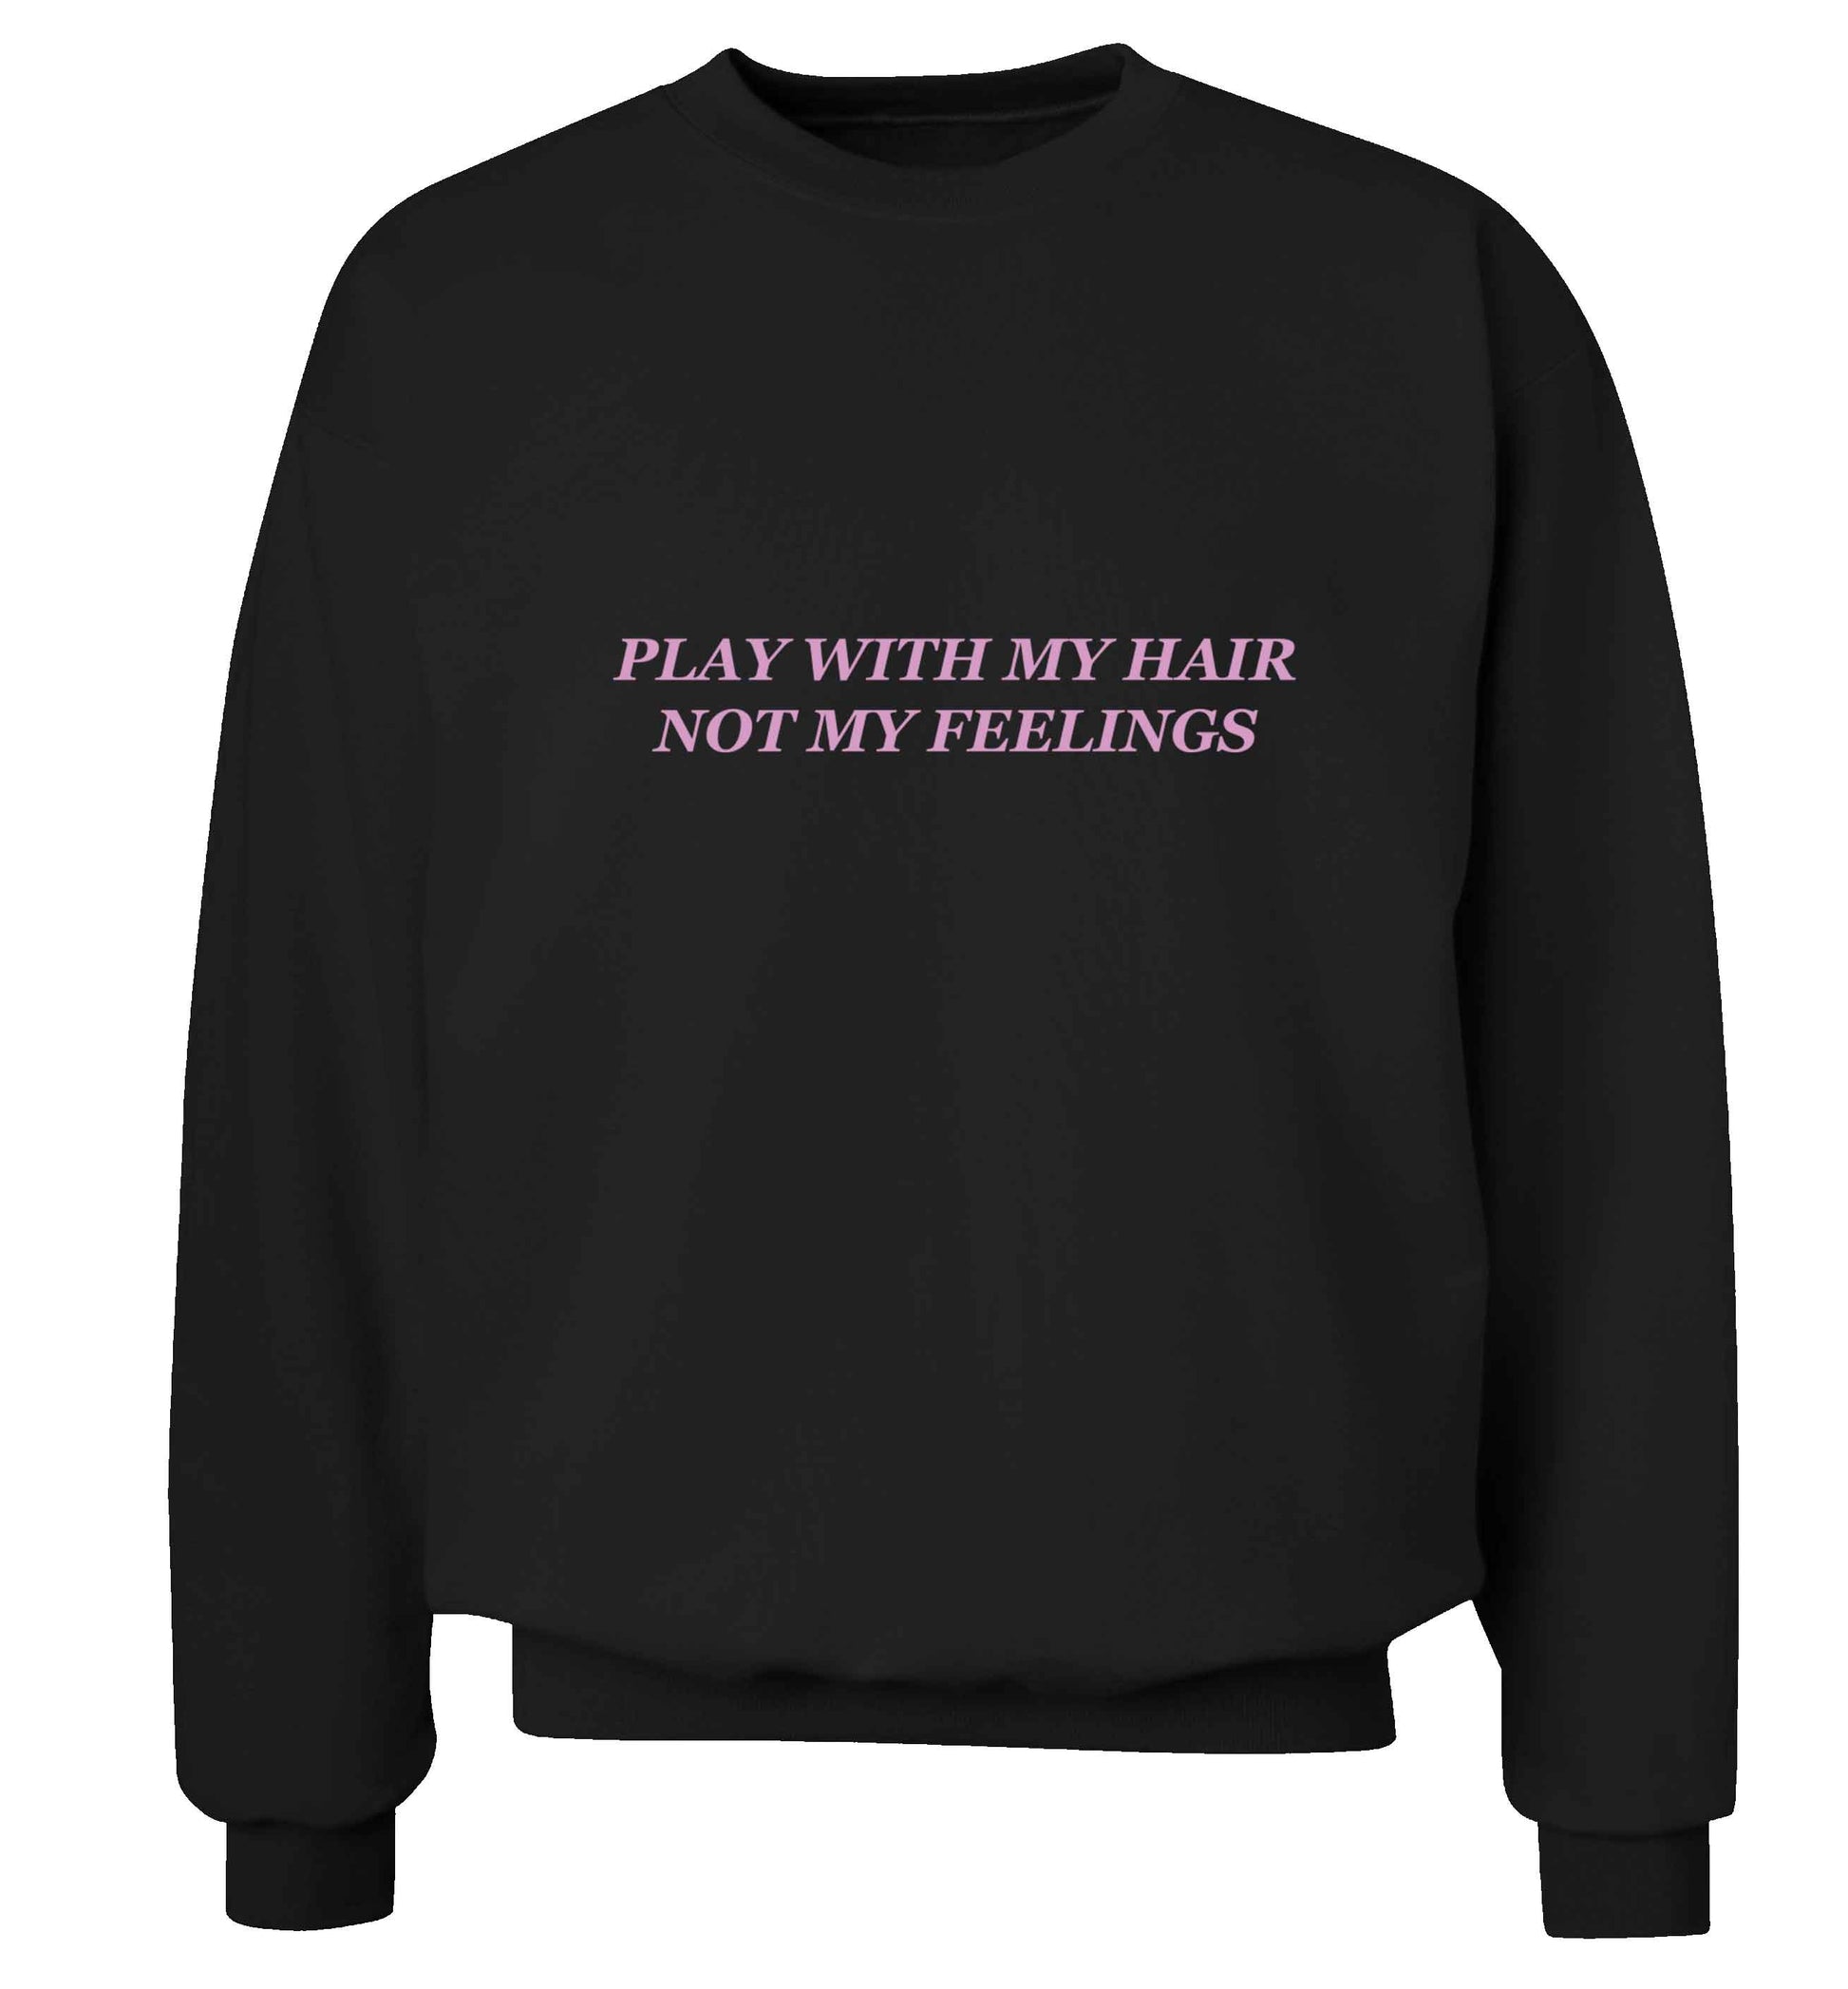 Play with my hair not my feelings adult's unisex black sweater 2XL